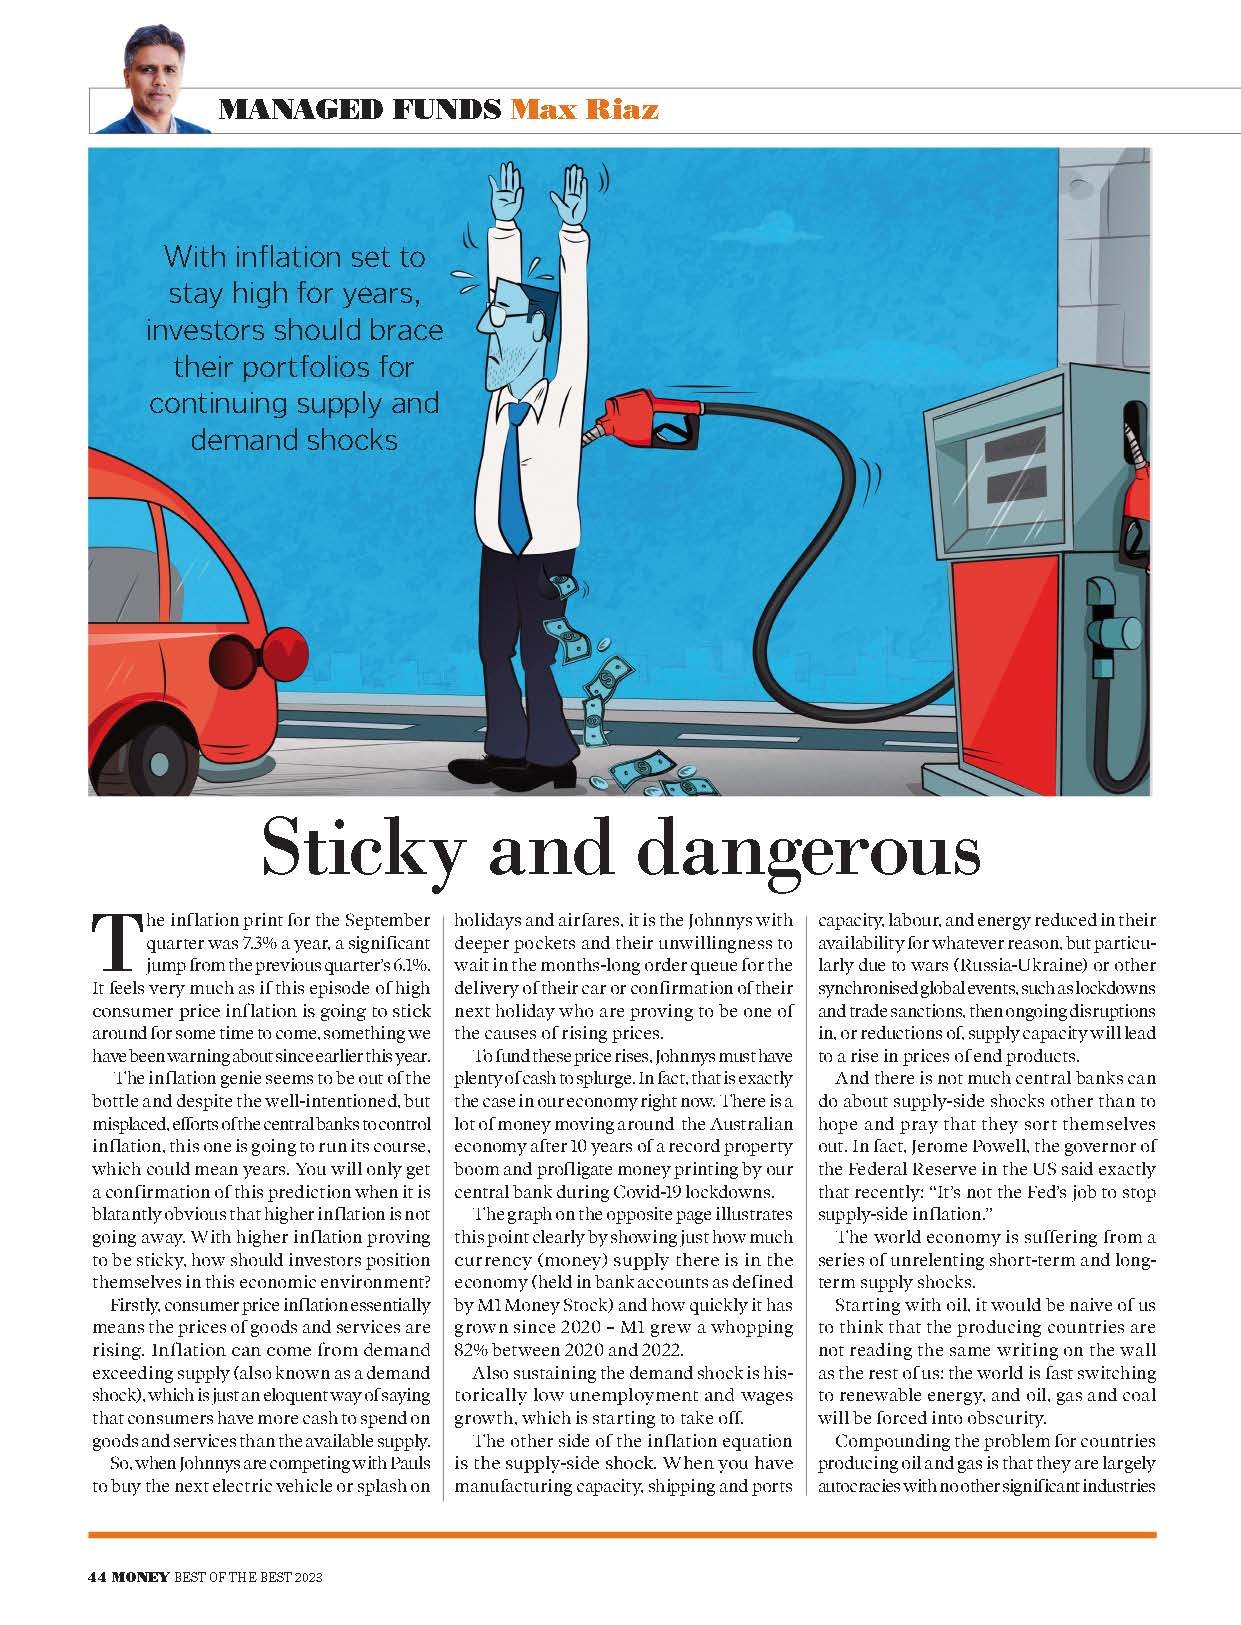 Money Mag Dec Article - Sticky and dangerous_Page_2.jpg